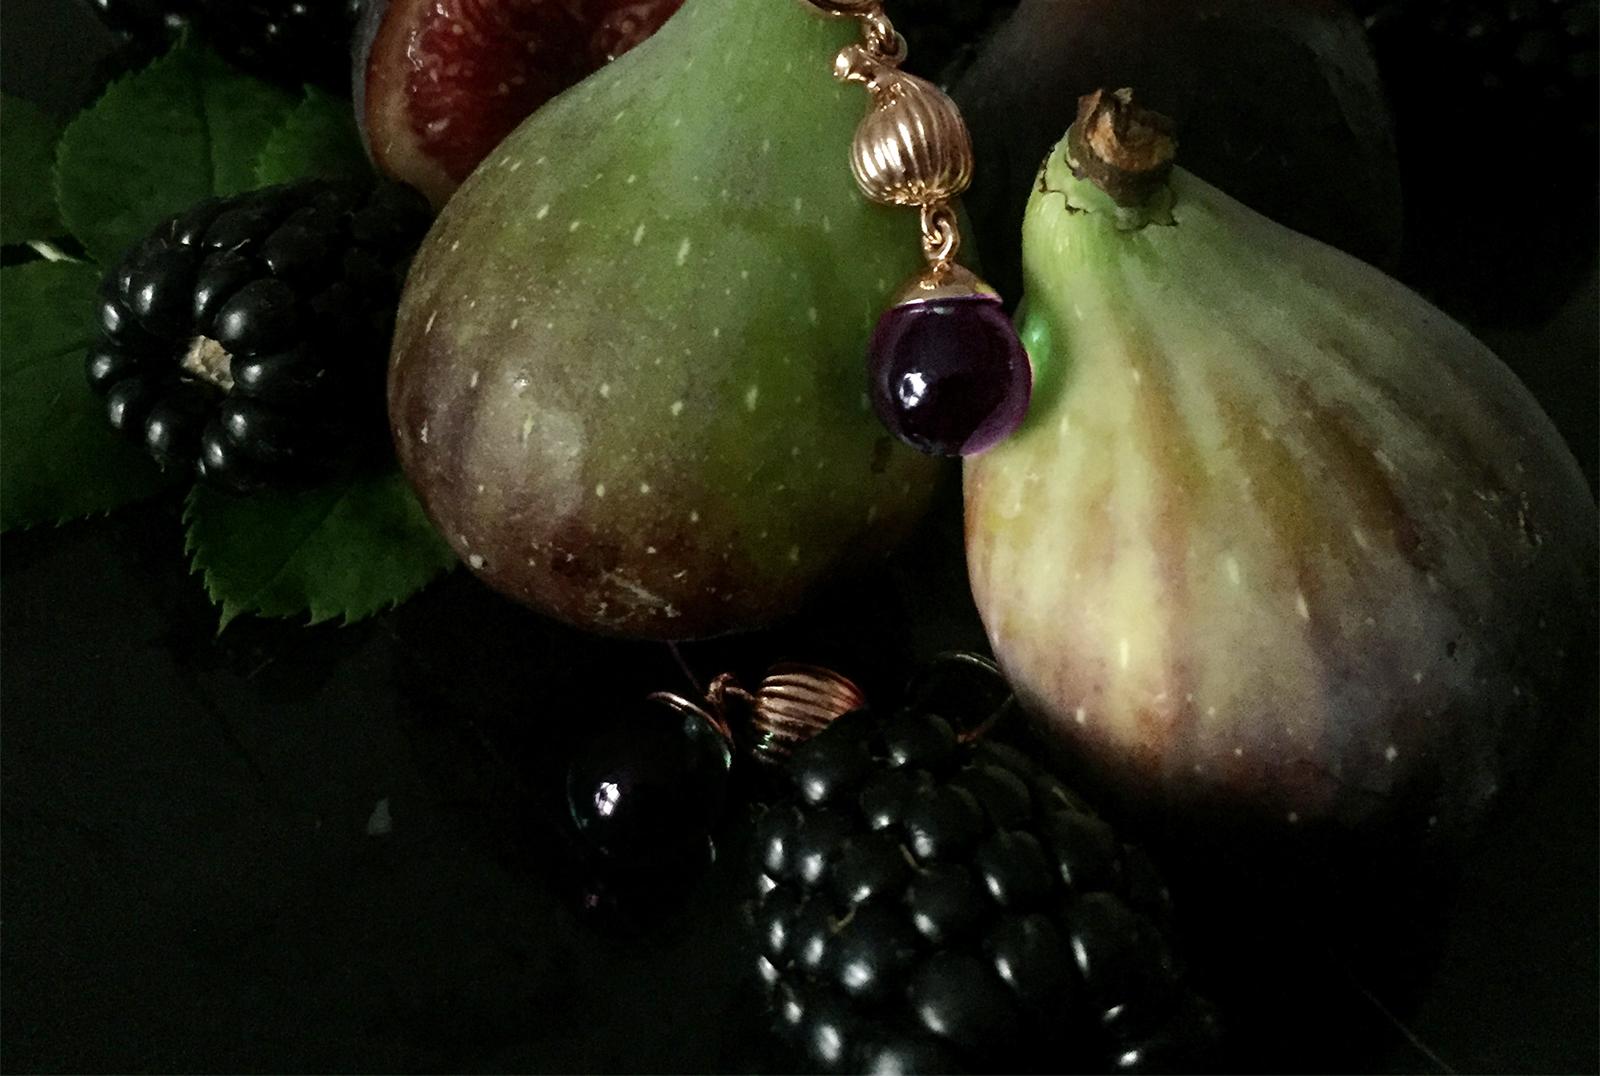 This 18 karat yellow gold Fig drop pendant necklace features a cabochon natural amethyst gem that is open to light. The collection was previously featured in Vogue UA.

The artist, Polya Medvedeva, was inspired to create a jewelry collection